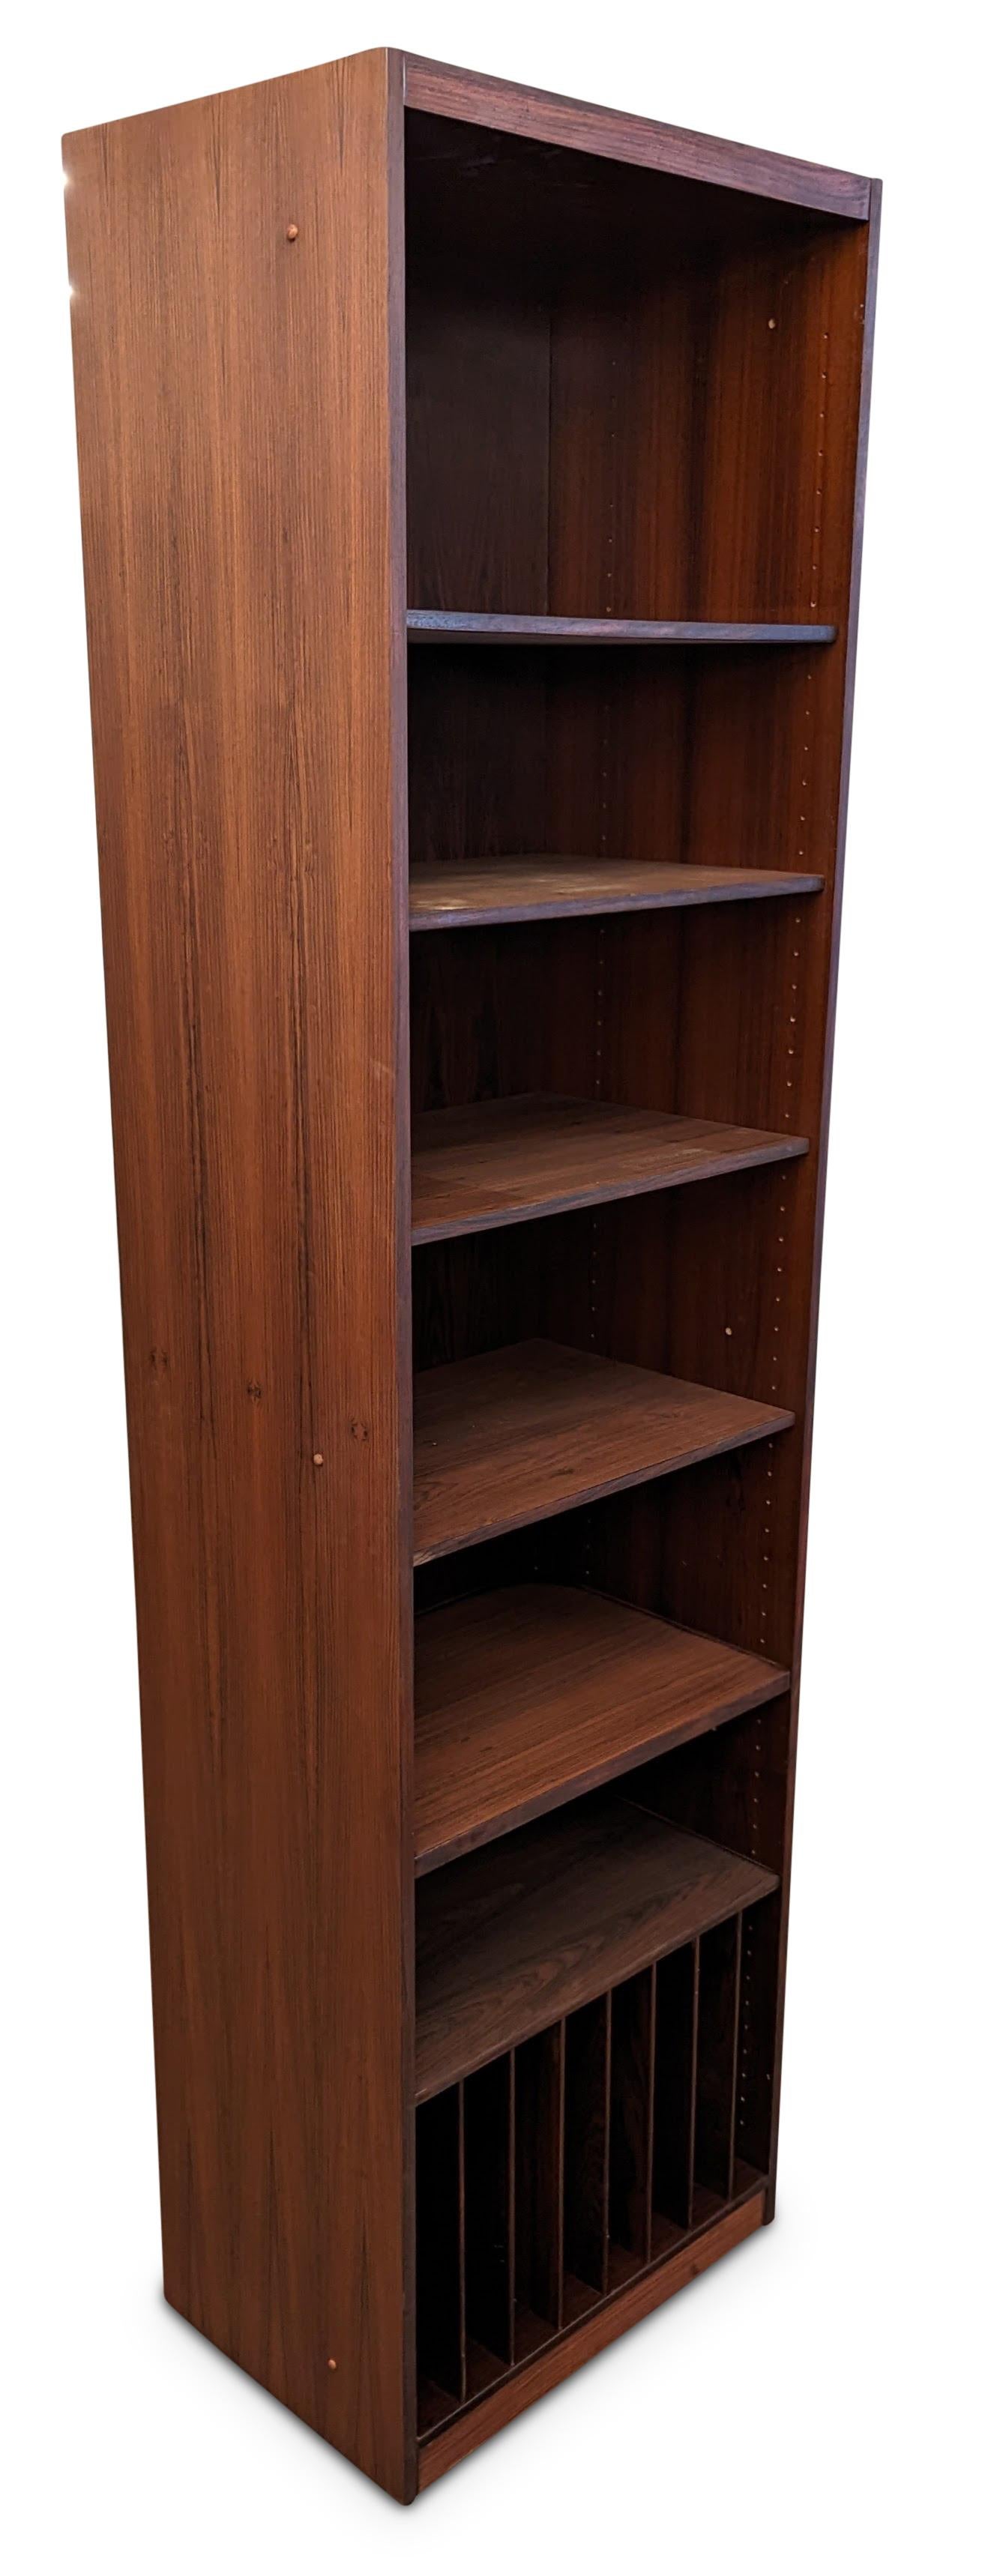 Vintage Danish Mid-Century Modern, made in the 1950s - Recently refurbished

The piece is more than 65+ years old and some wear and tear can be expected, but we do everything we can to refurbish them in respect to the design.

Brazilian rosewood